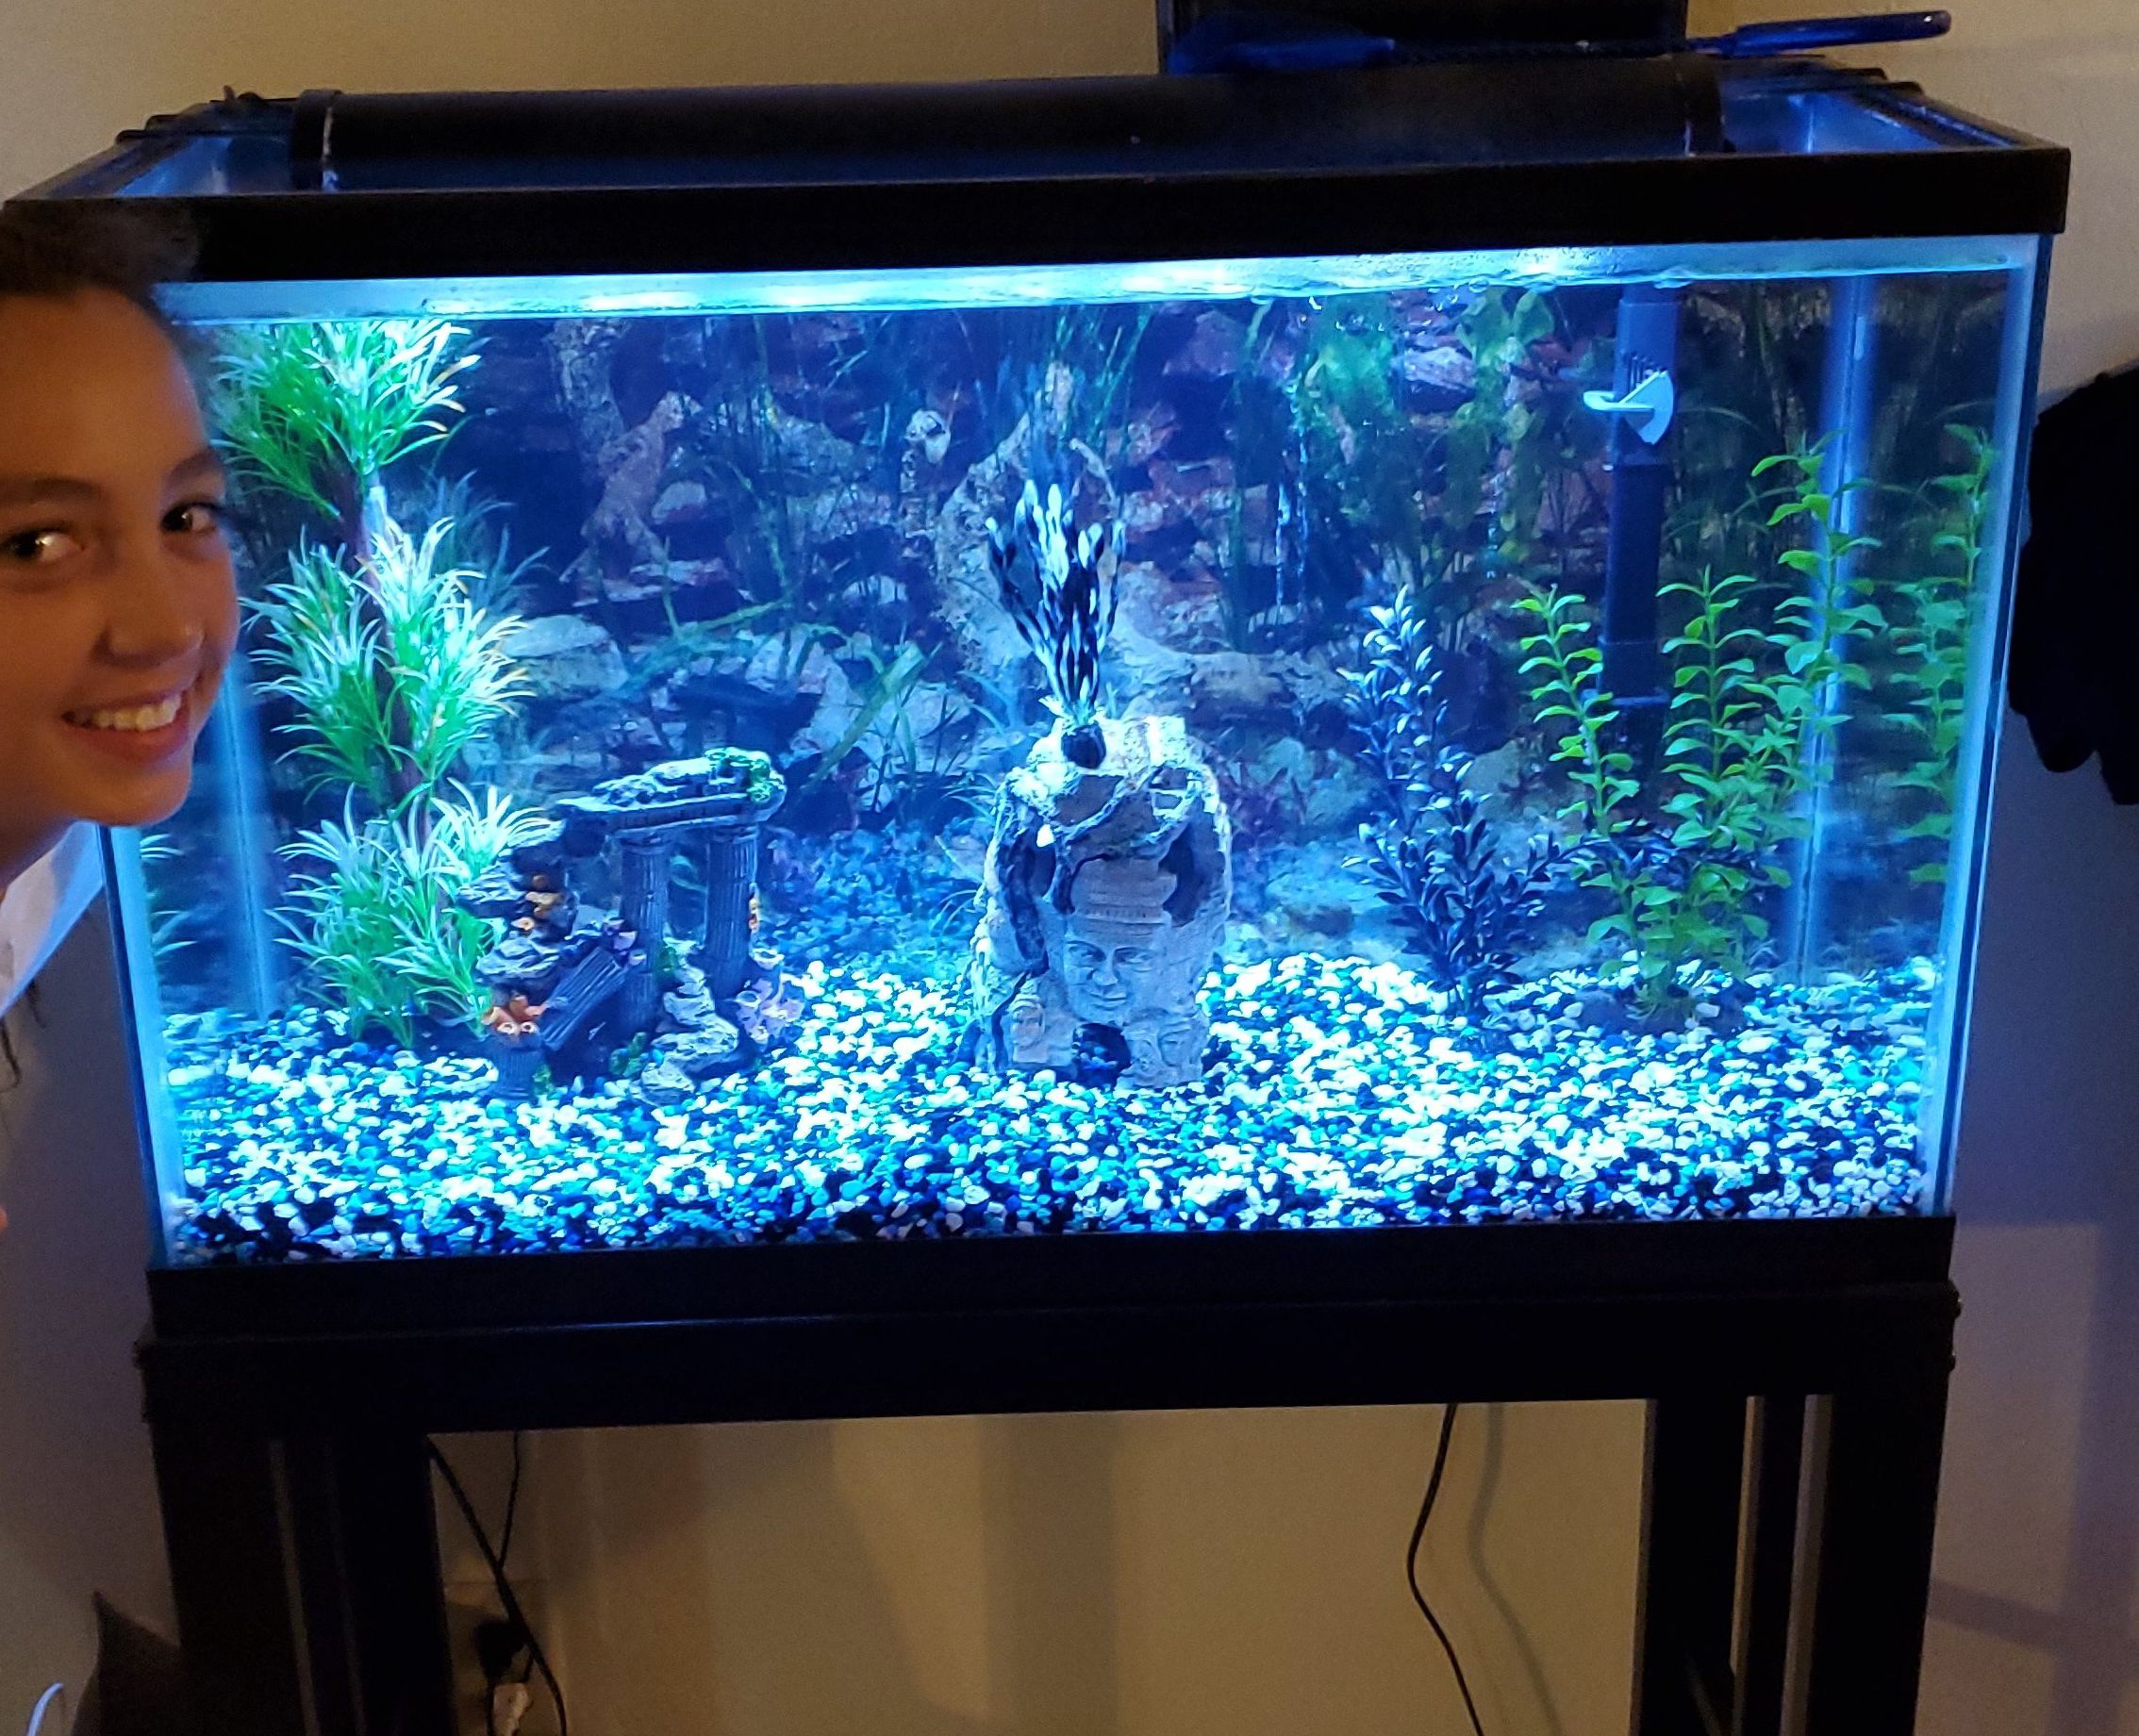 30 gallon fish ta k with all accessories. Led light. Cleaning tools. Pickup only